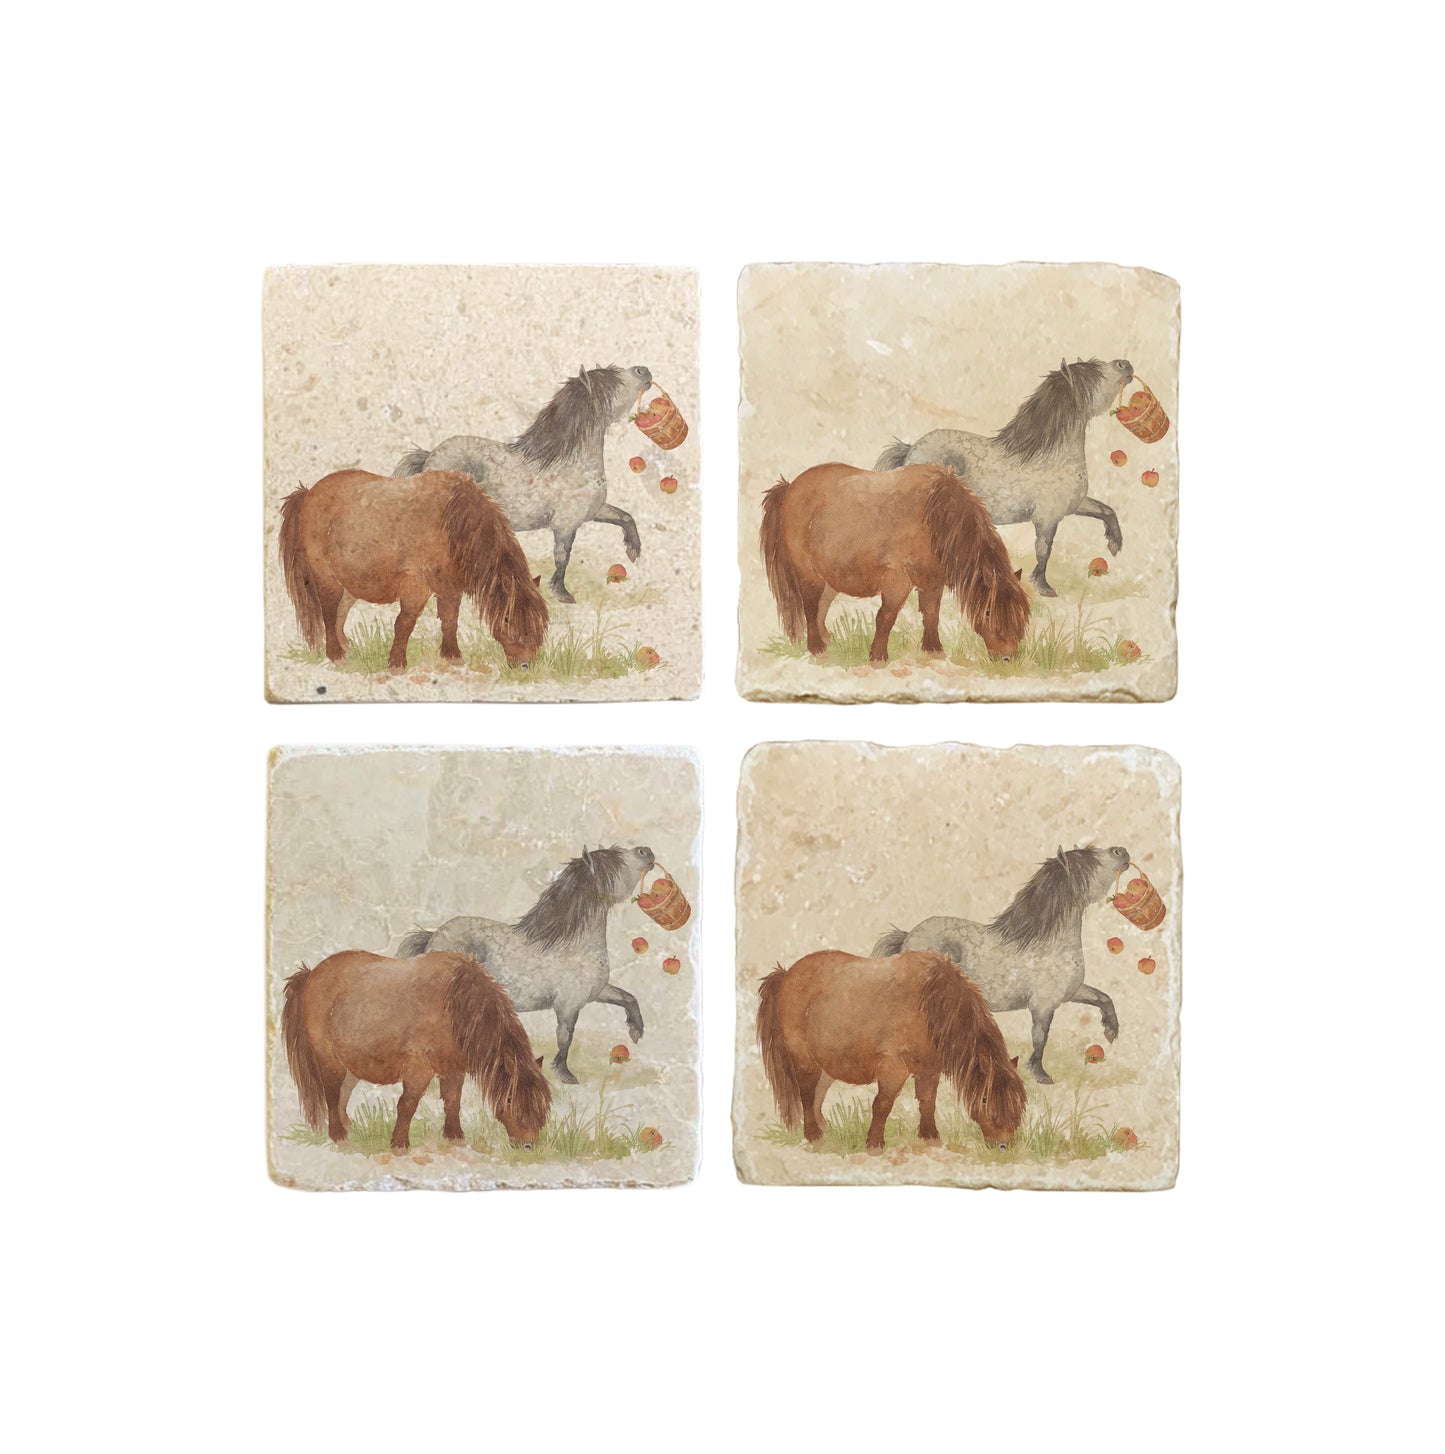 A set of 4 square marble coasters, featuring a watercolour design of two cheeky Shetland ponies stealing apples.